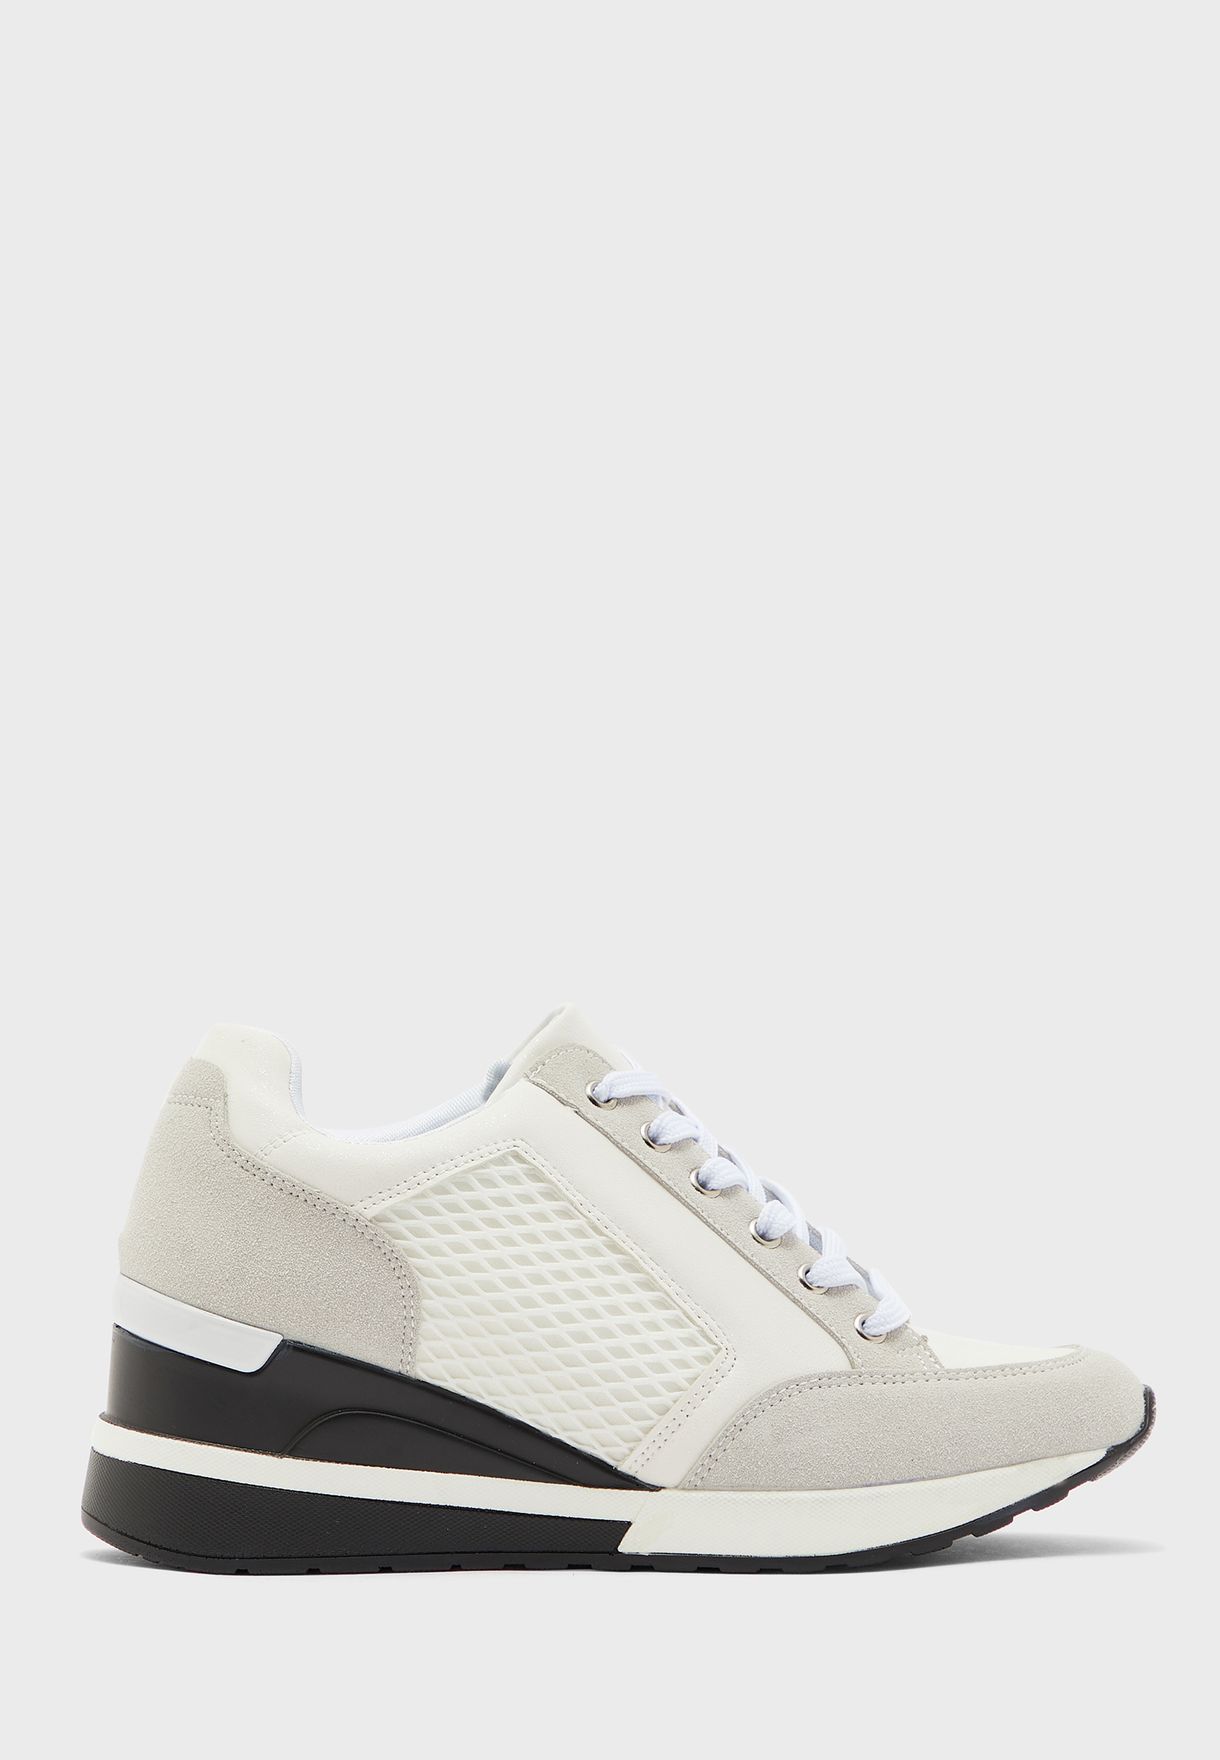 white wedge sneakers for women